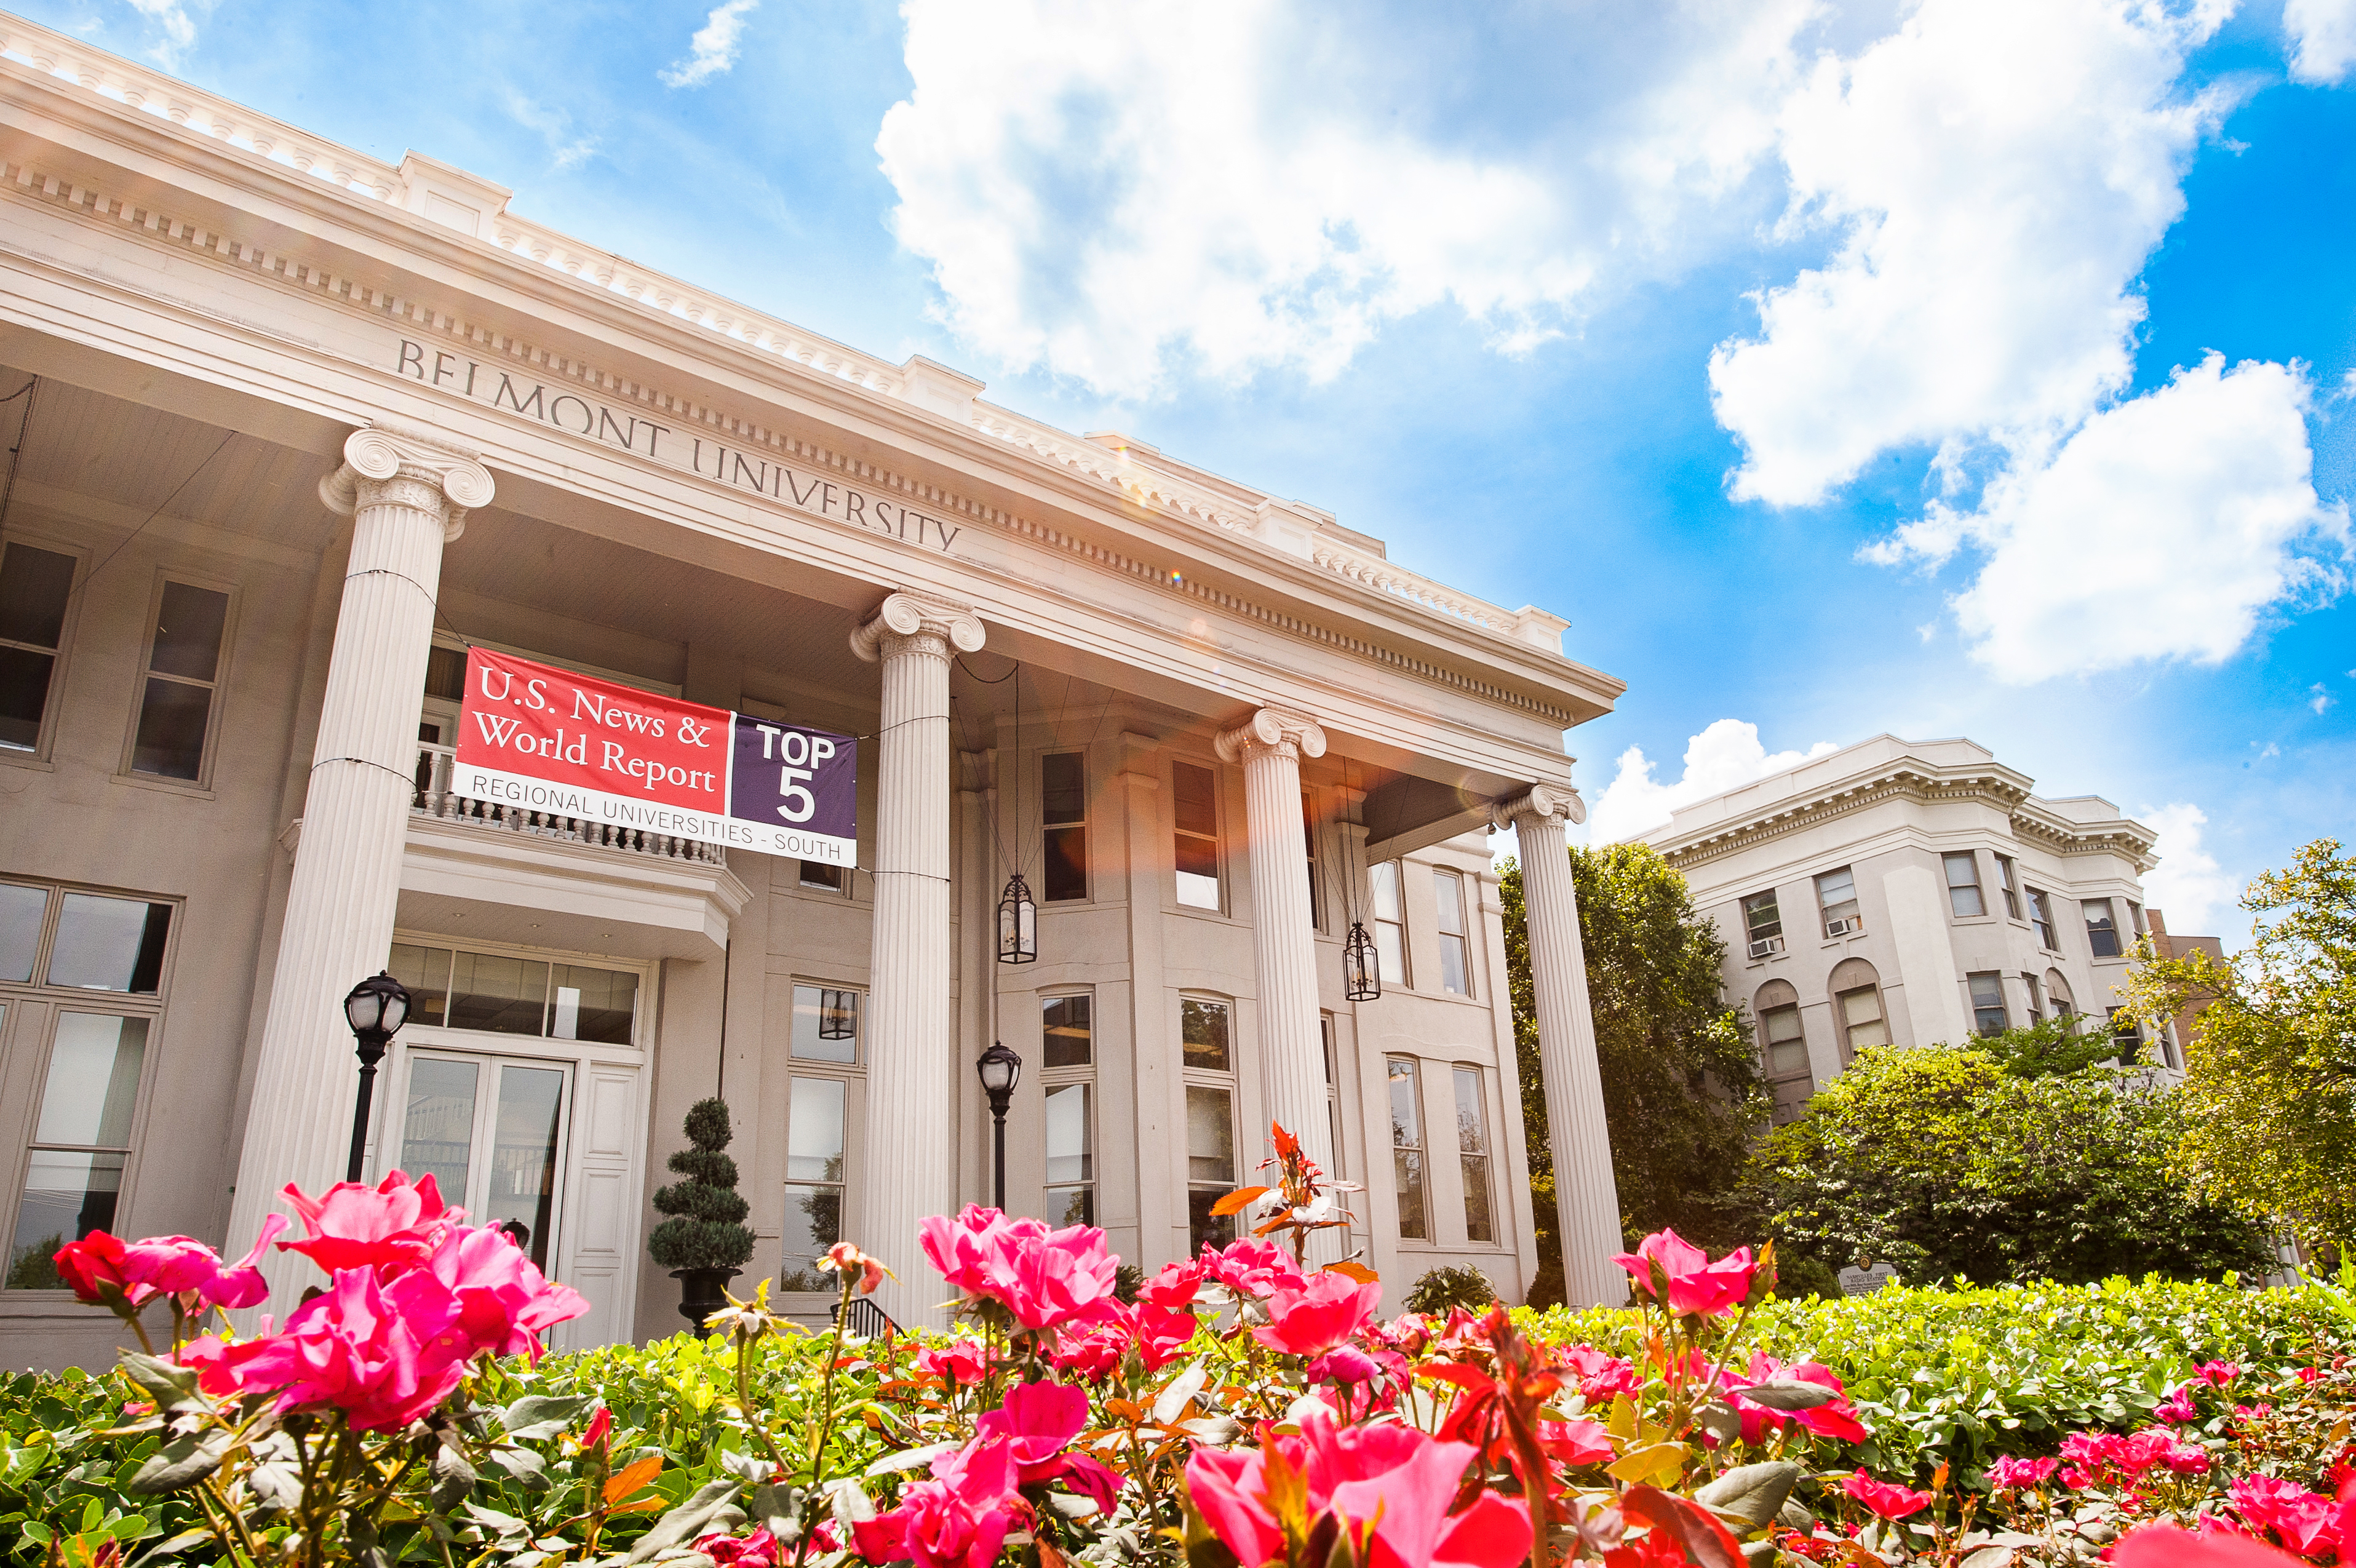 Belmont Its Top 5 Place in Annual News College Rankings Belmont University News & Media